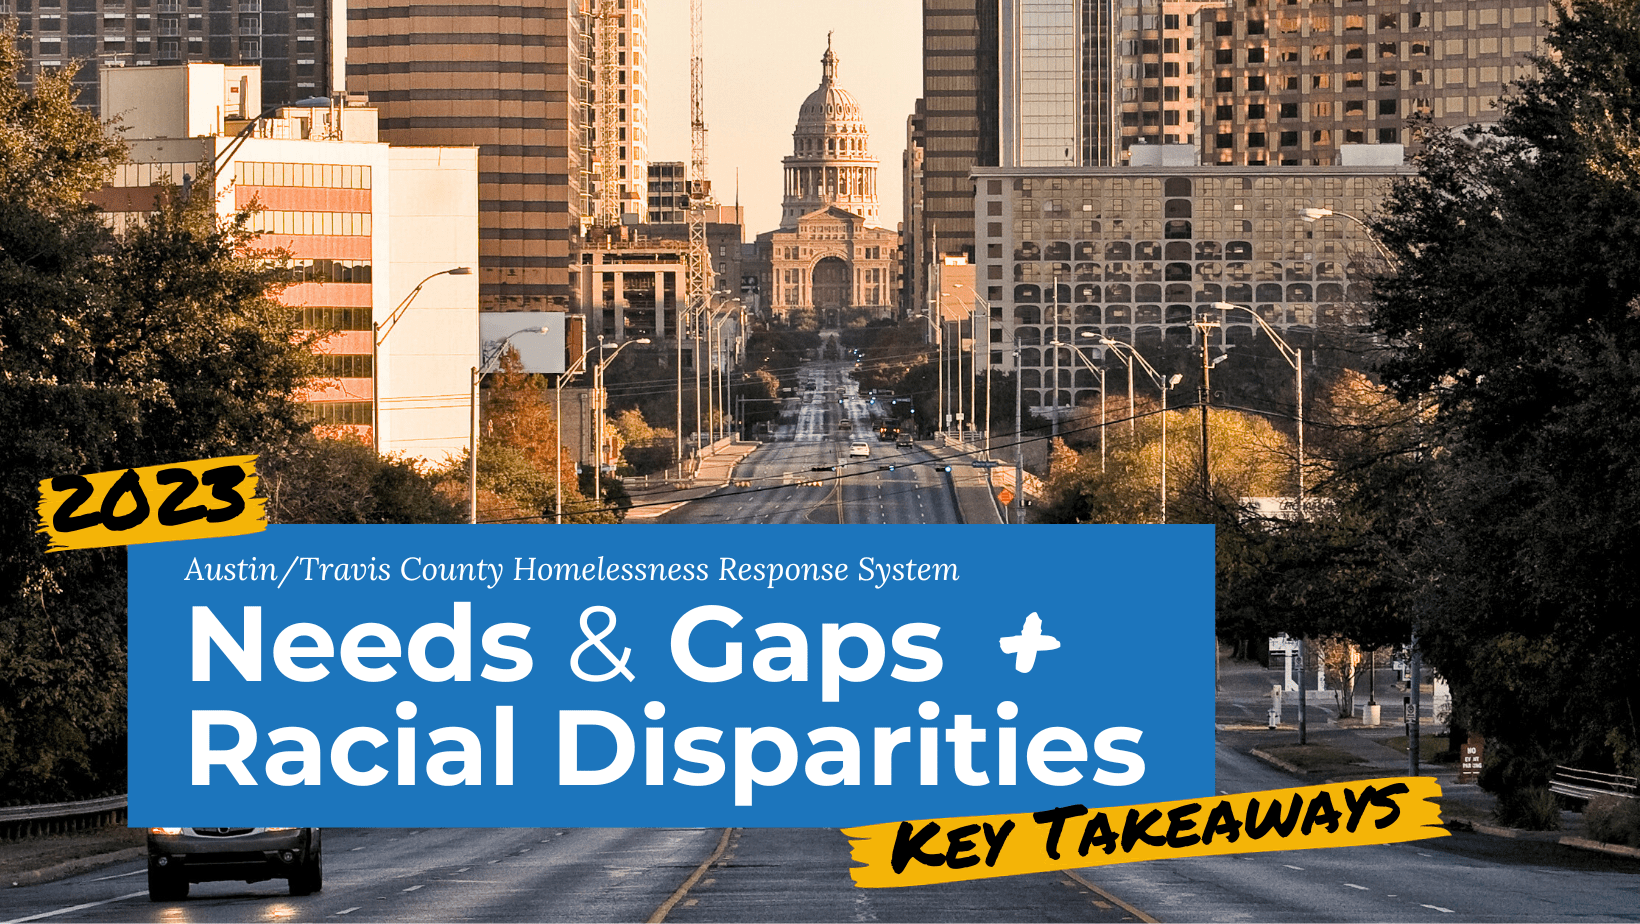 Photo of Austin and Texas Capitol building with text that says, "2023 Austin/Travis County Homelessness Response System Needs & Gaps + Racial Disparities, Key takeaways"